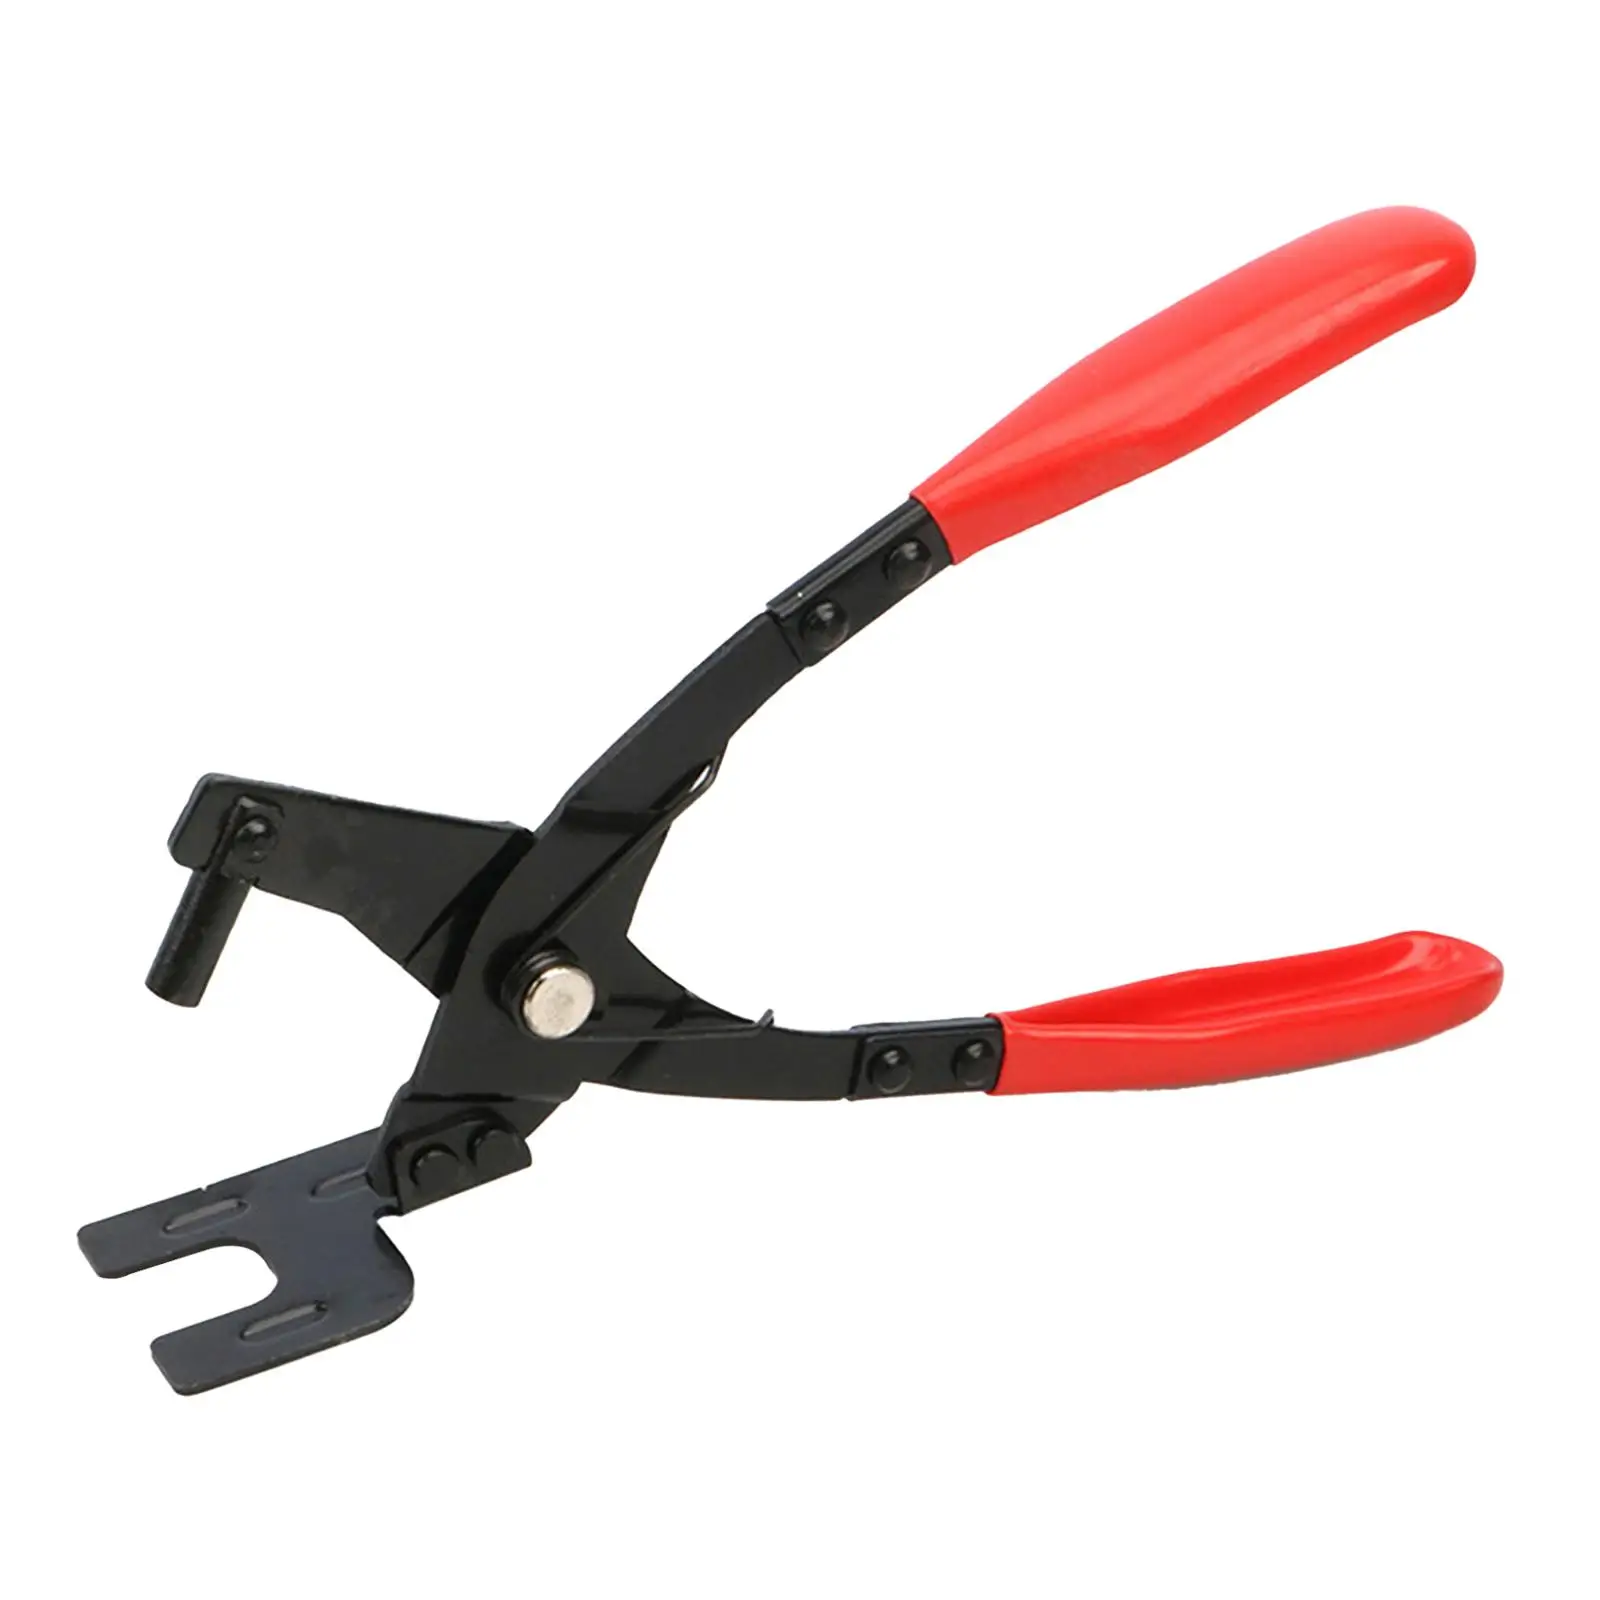 Exhaust Hanger Removal Pliers Hand Tools Anti Slip Muffler Hanger Removal Tool Red Compatible with All Exhaust Rubber Hangers